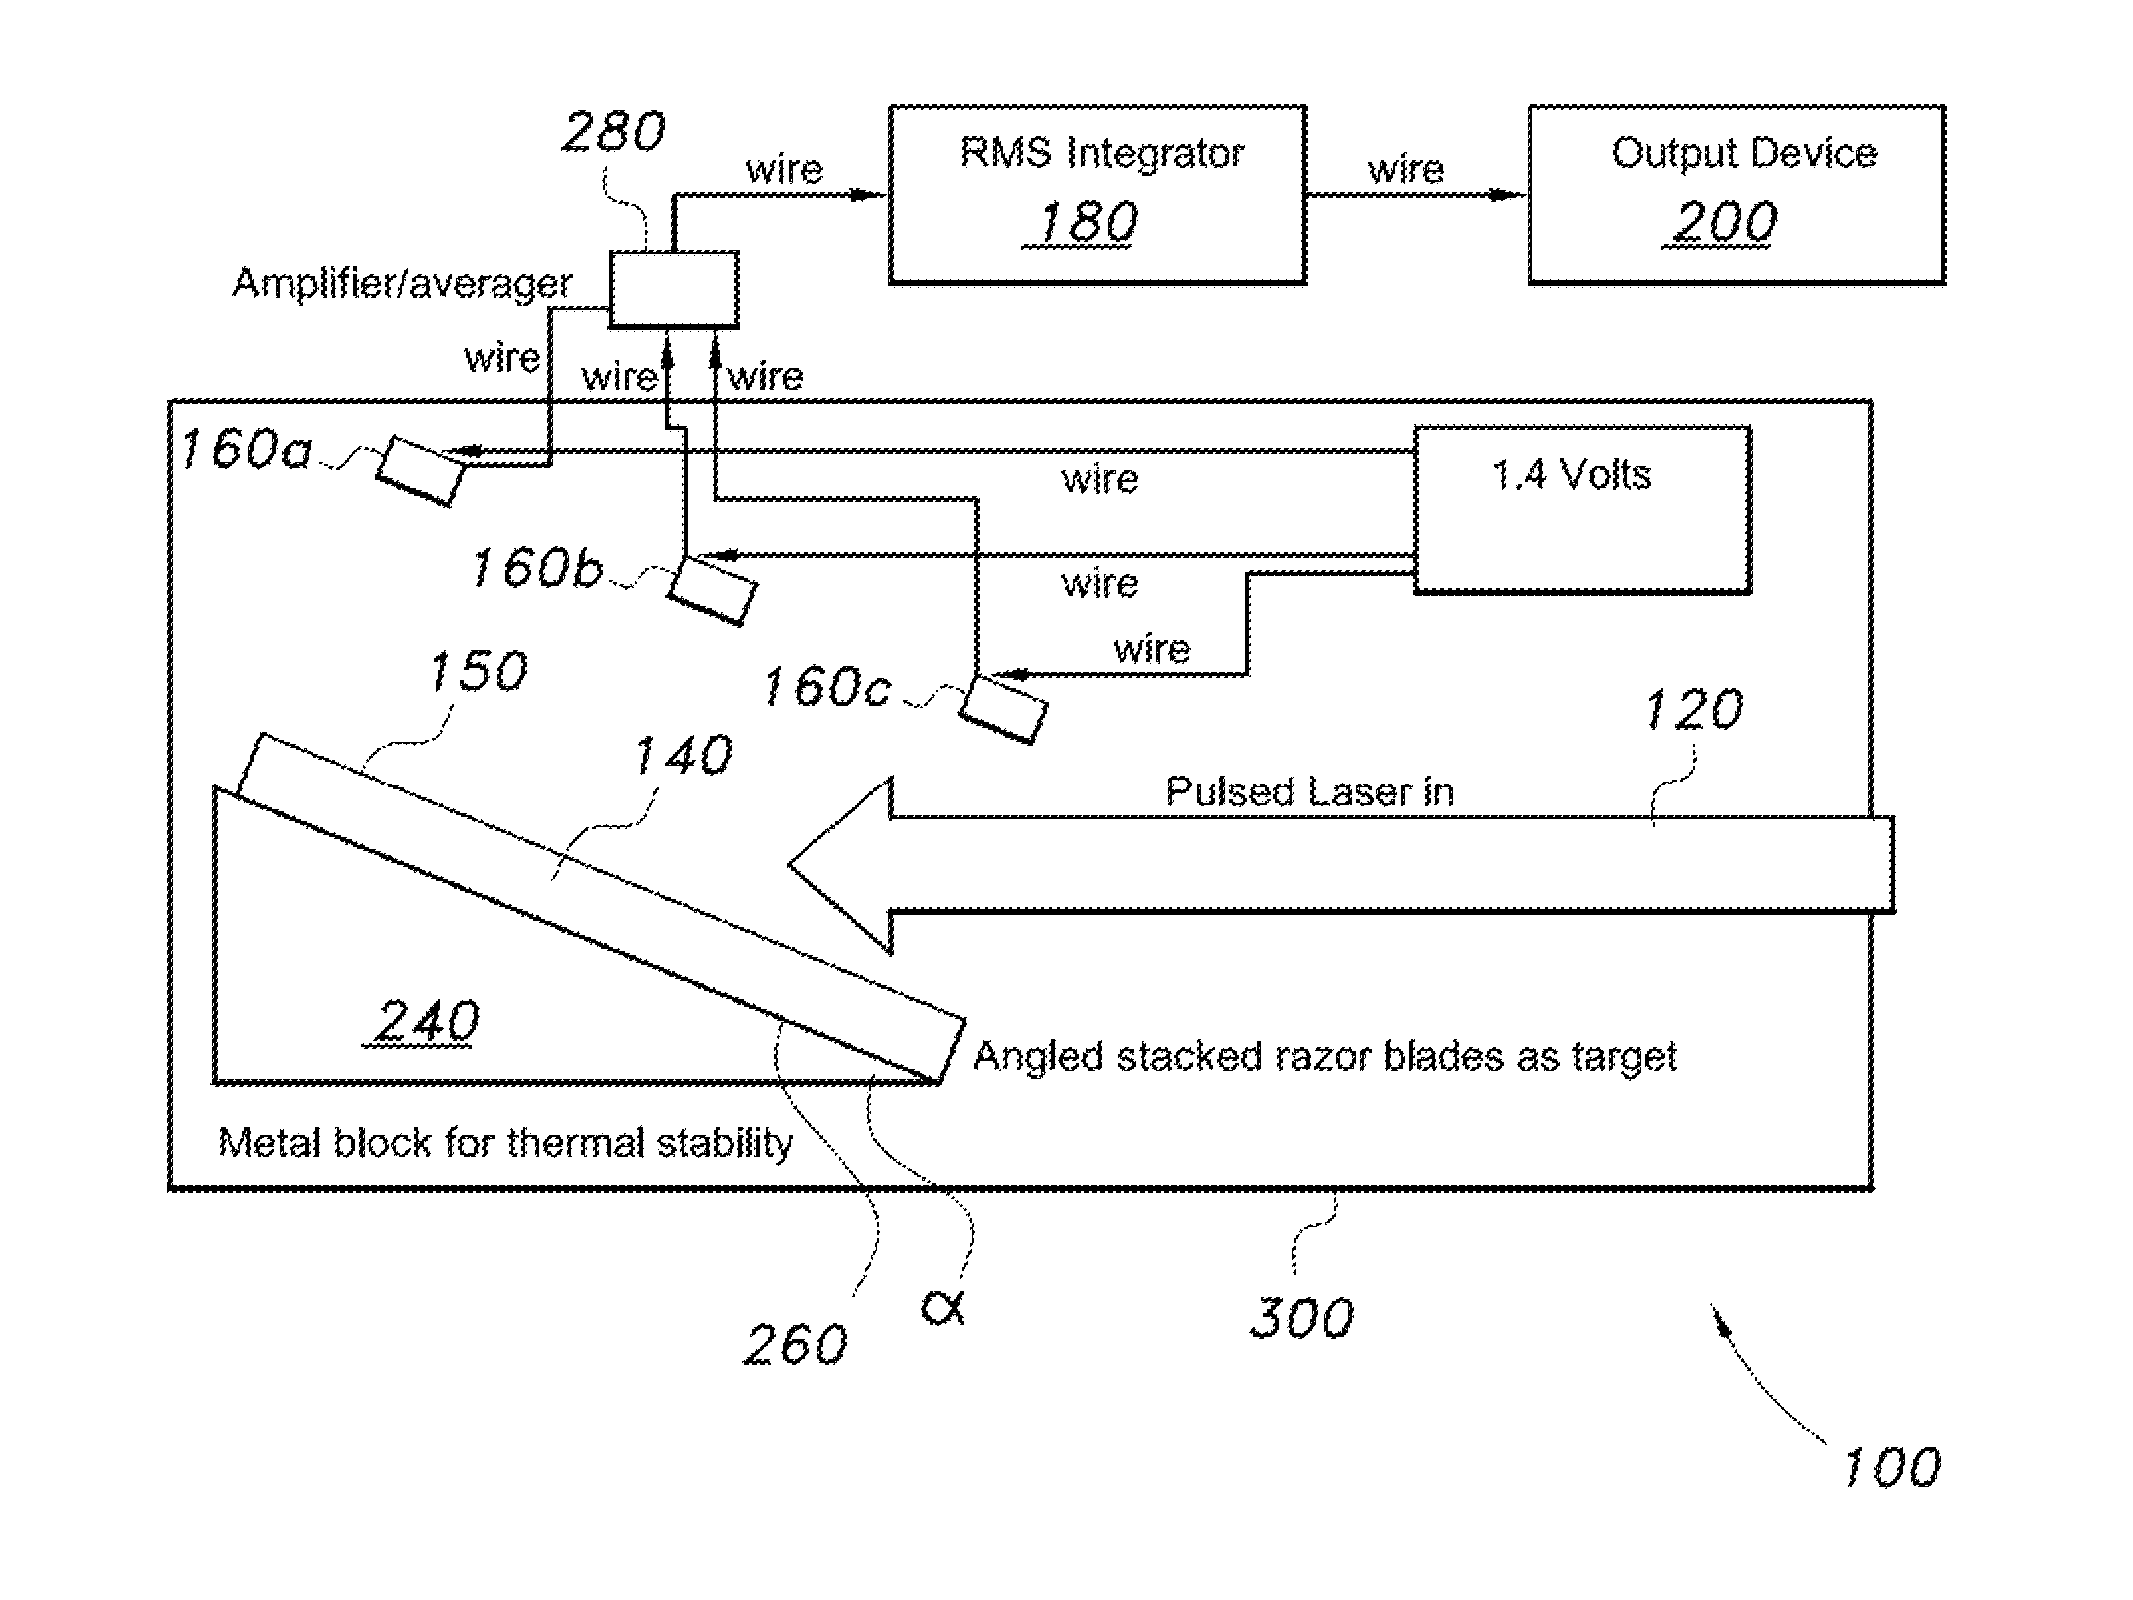 Apparatus and method for measuring energy in a laser beam